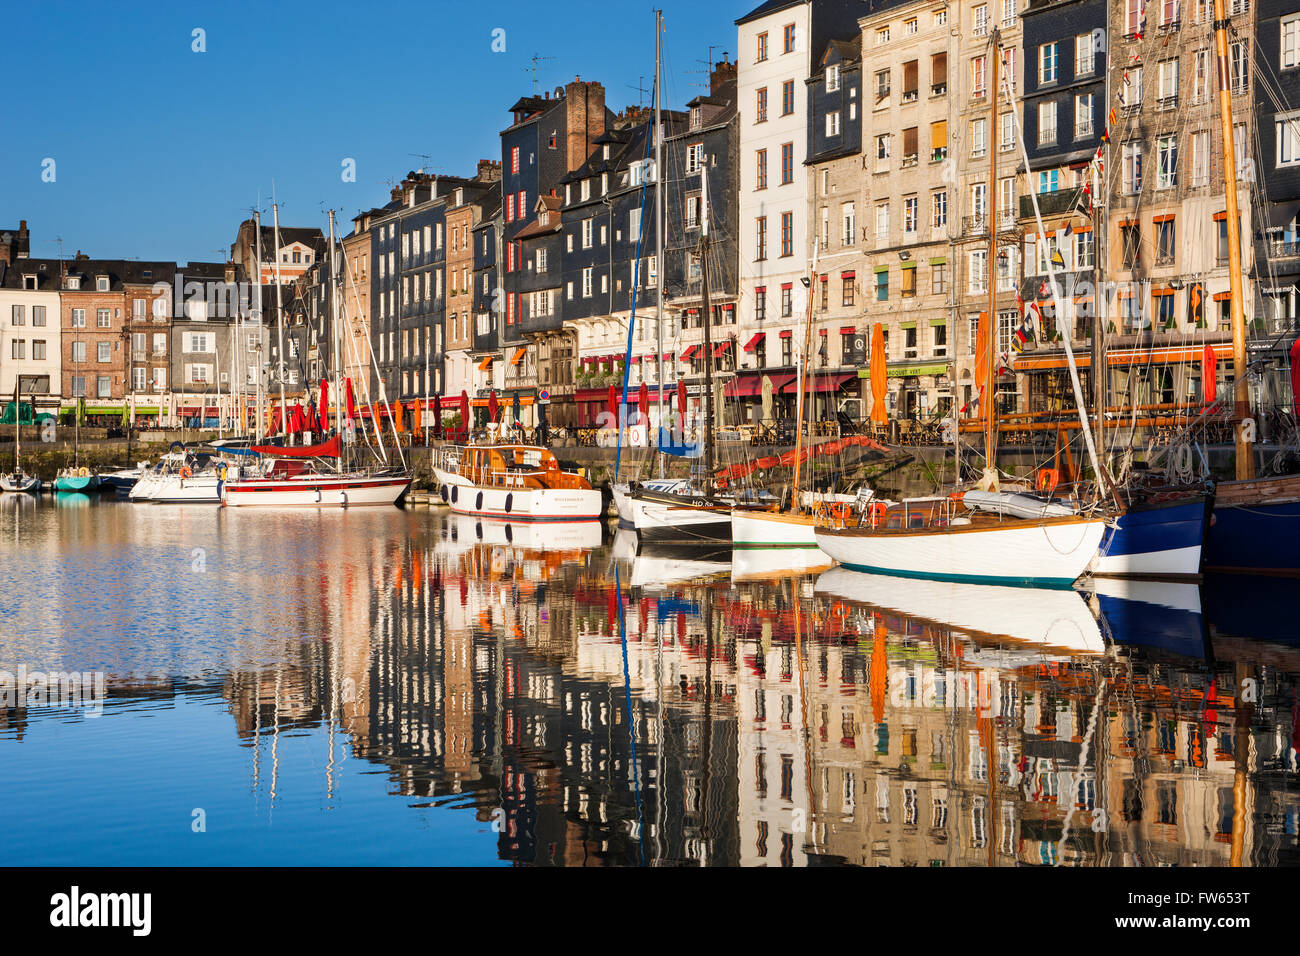 Houses and boats at the old harbor with reflections in calm water, Vieux Bassin, Honfleur, Calvados, Normandy, France Stock Photo